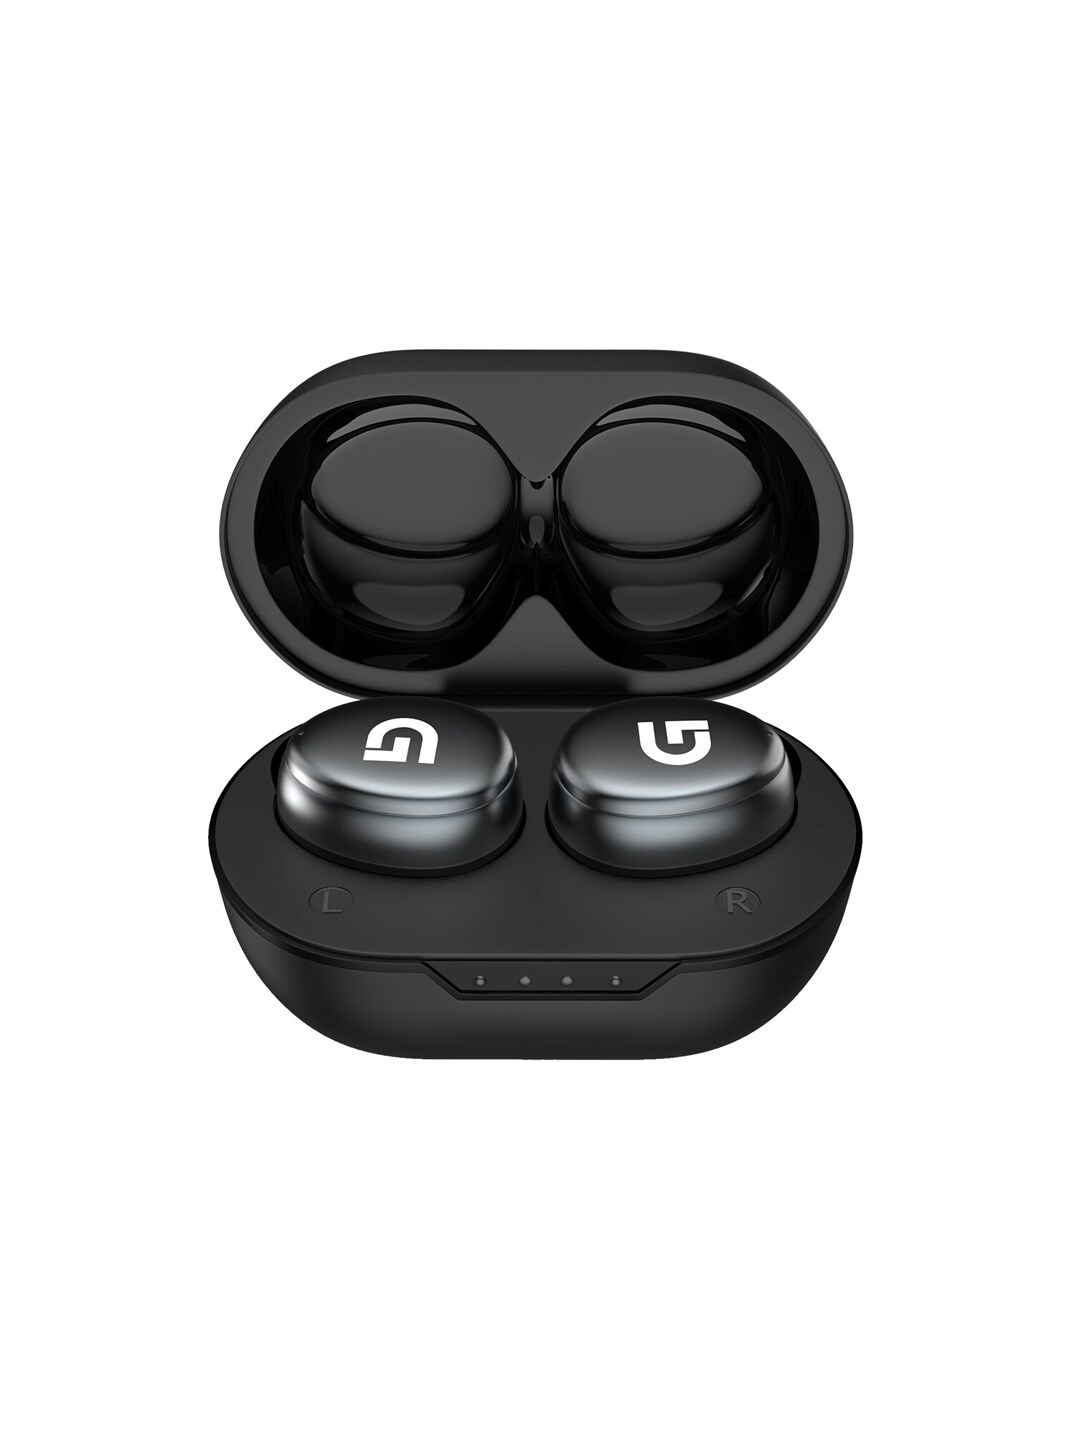 GIZMORE Black Solid GIZBUD 804 Bluetooth 5.0 Earbuds with Noise Isolation Price in India